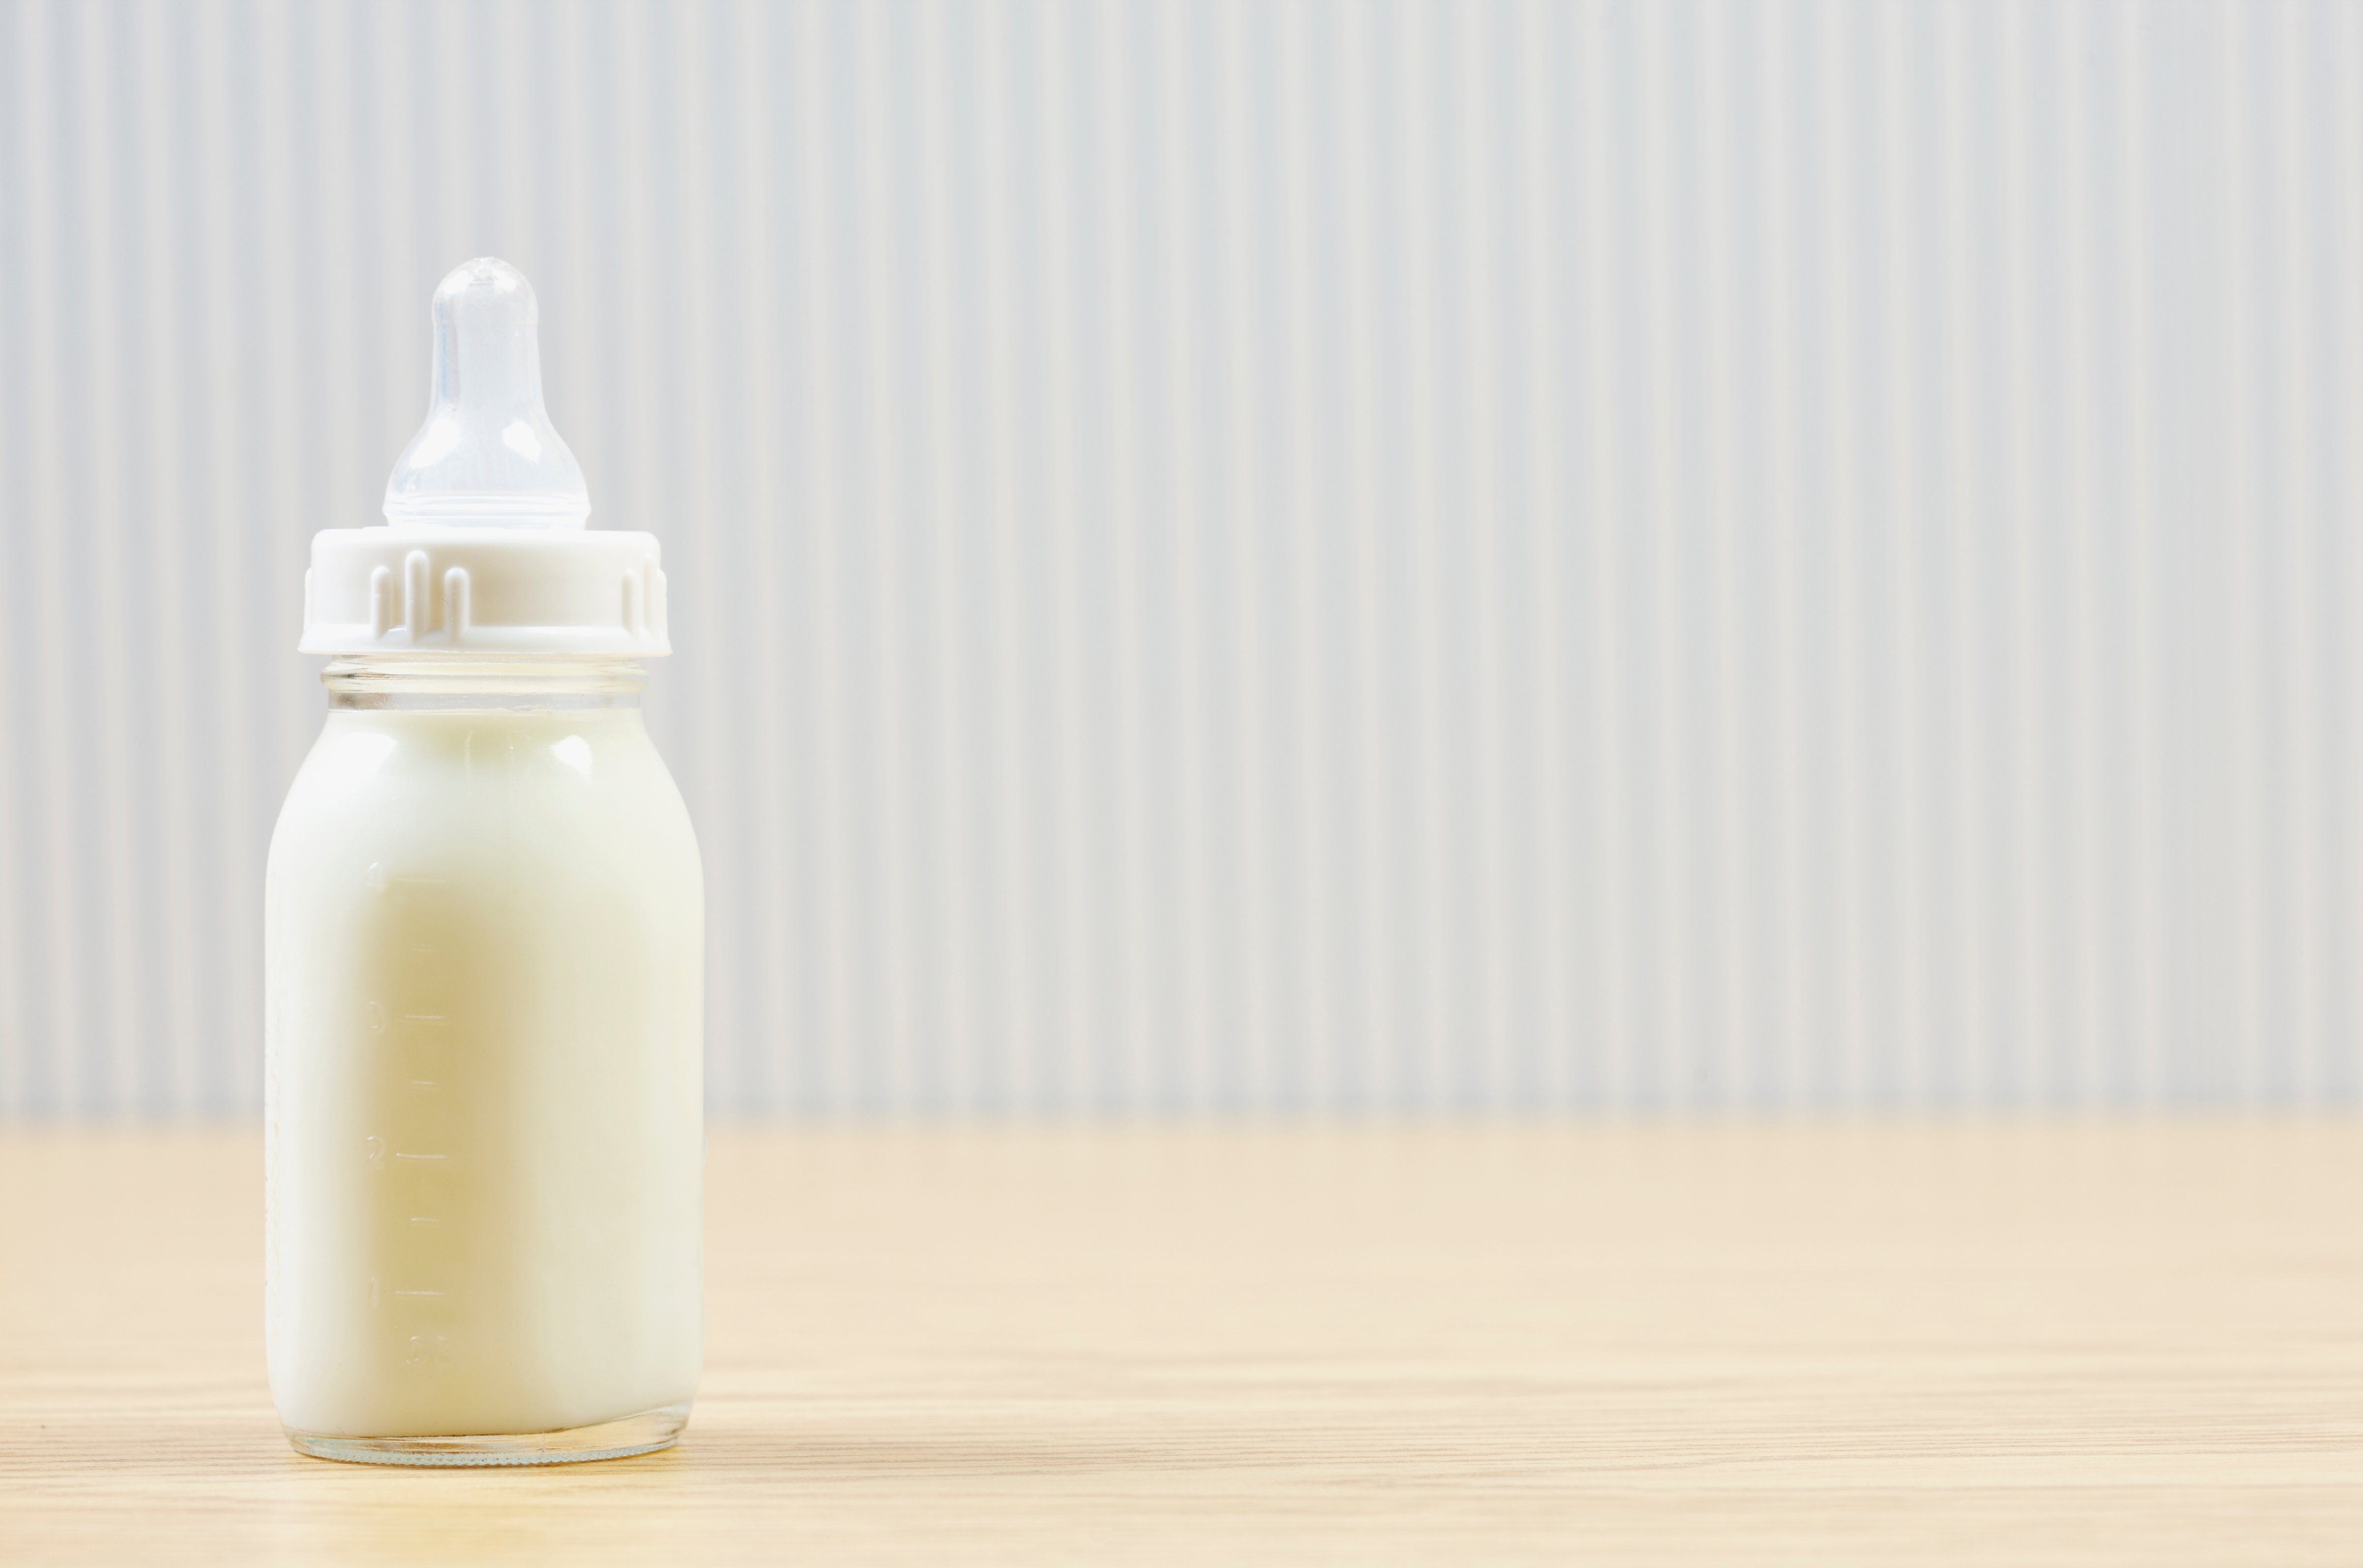 Baby Bottle (Getty Images)